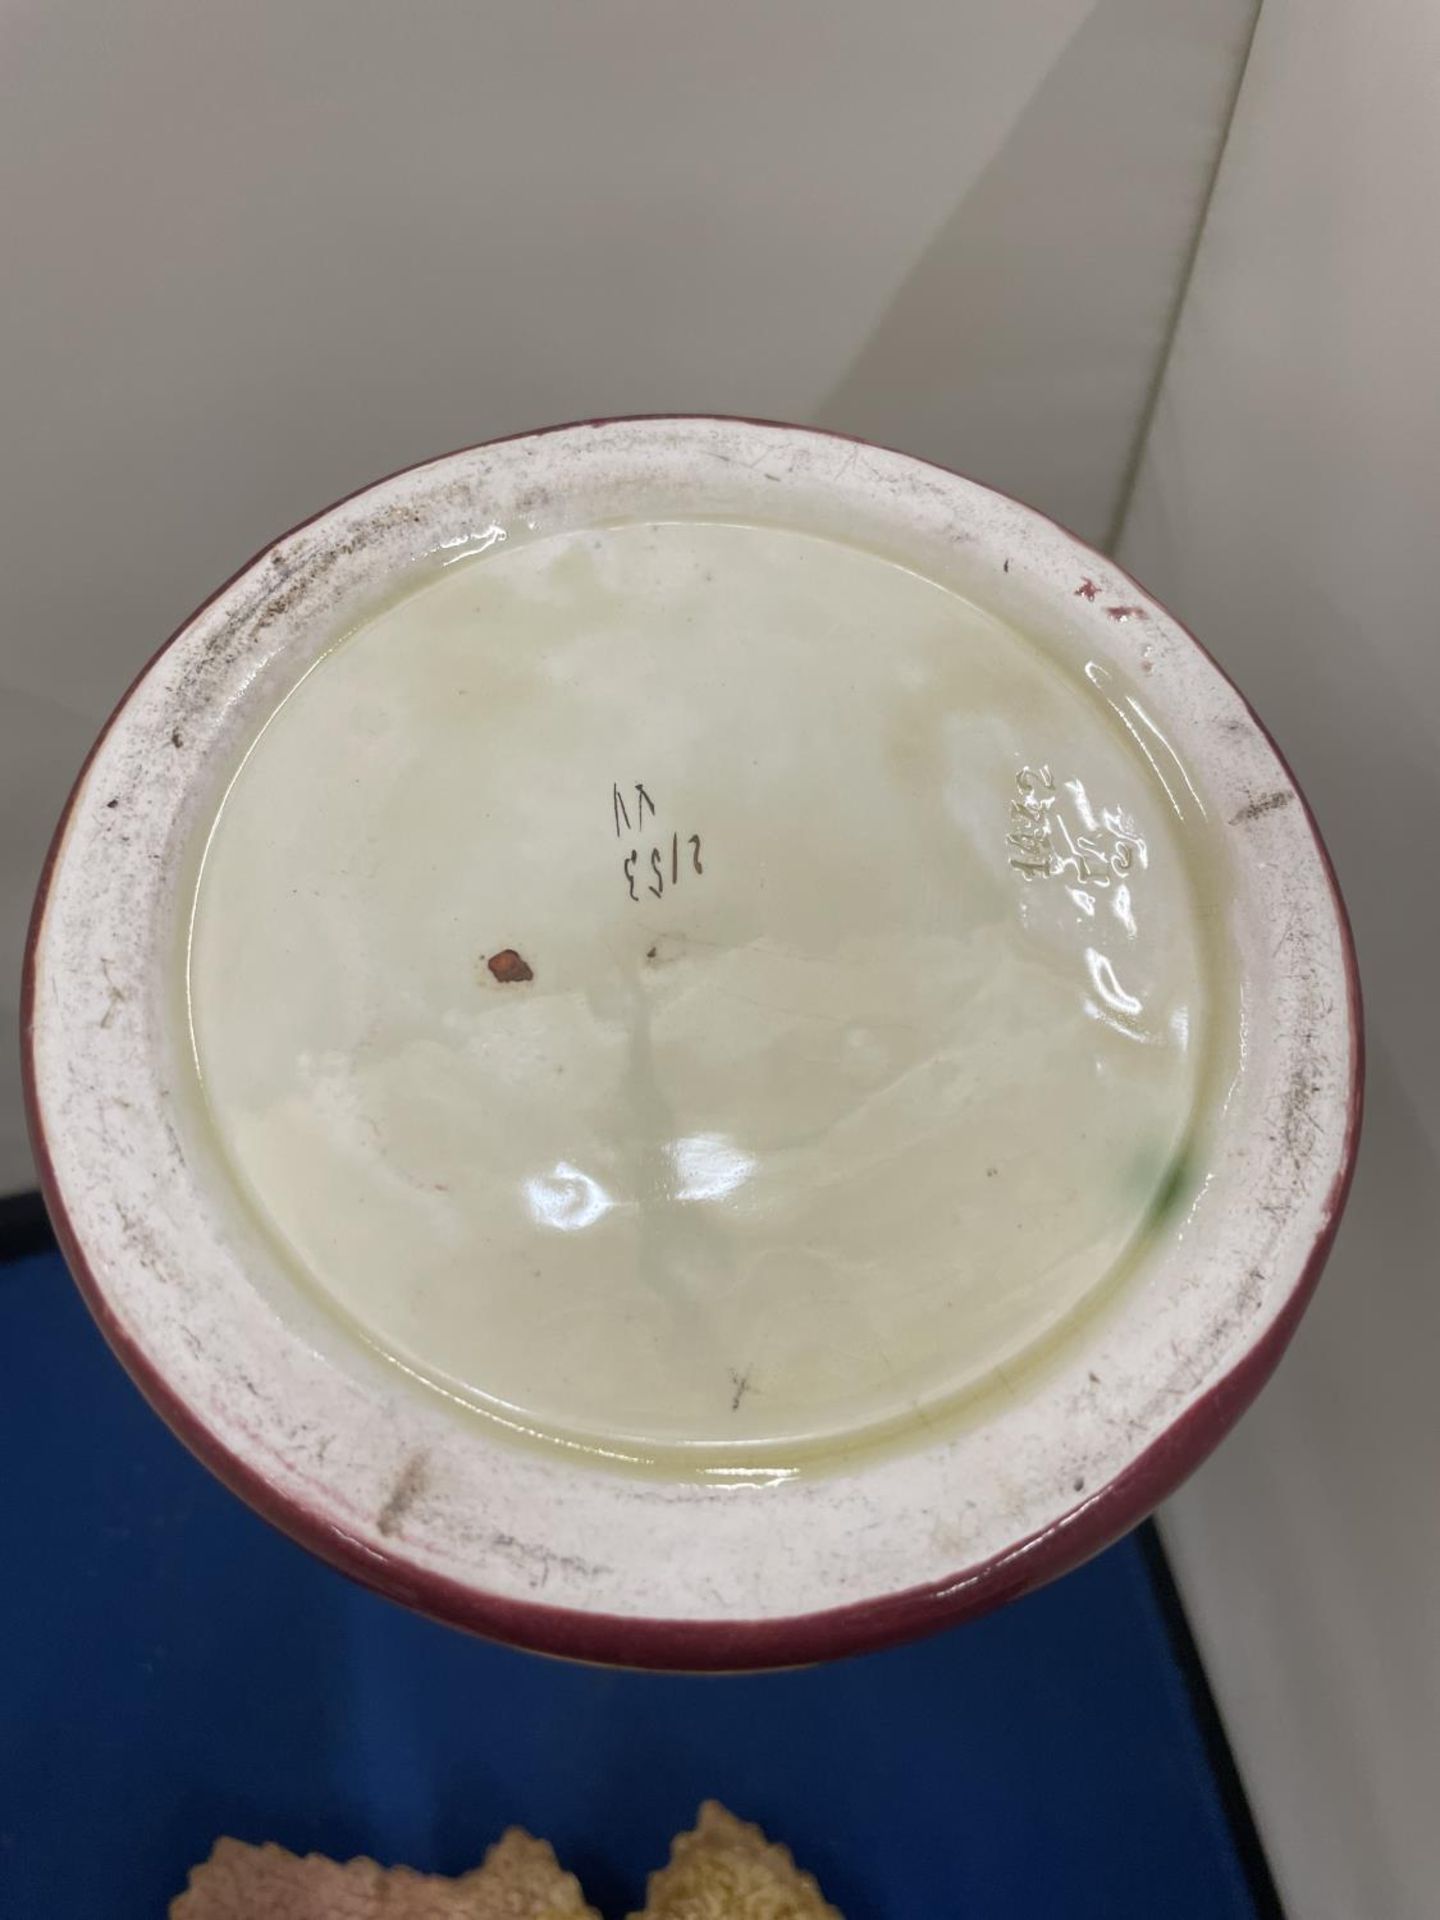 A LATE 19TH EARLY/20TH CENTURY TUBELINED ART NOUVEAU VASE AND A LEAF DISH - Image 7 of 12